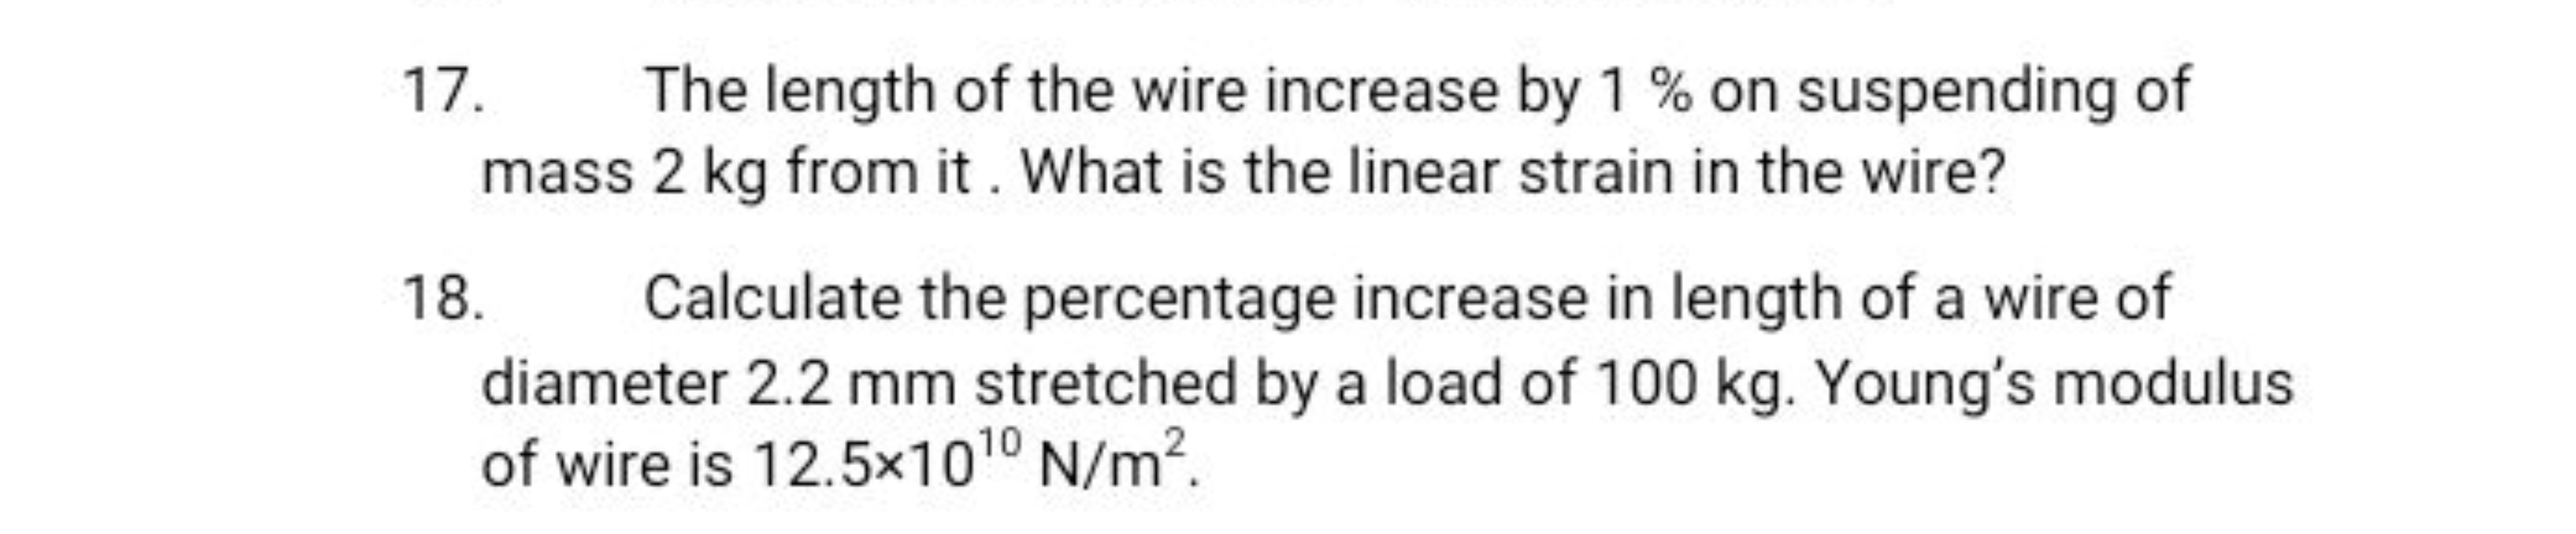 17. The length of the wire increase by 1% on suspending of mass 2 kg f